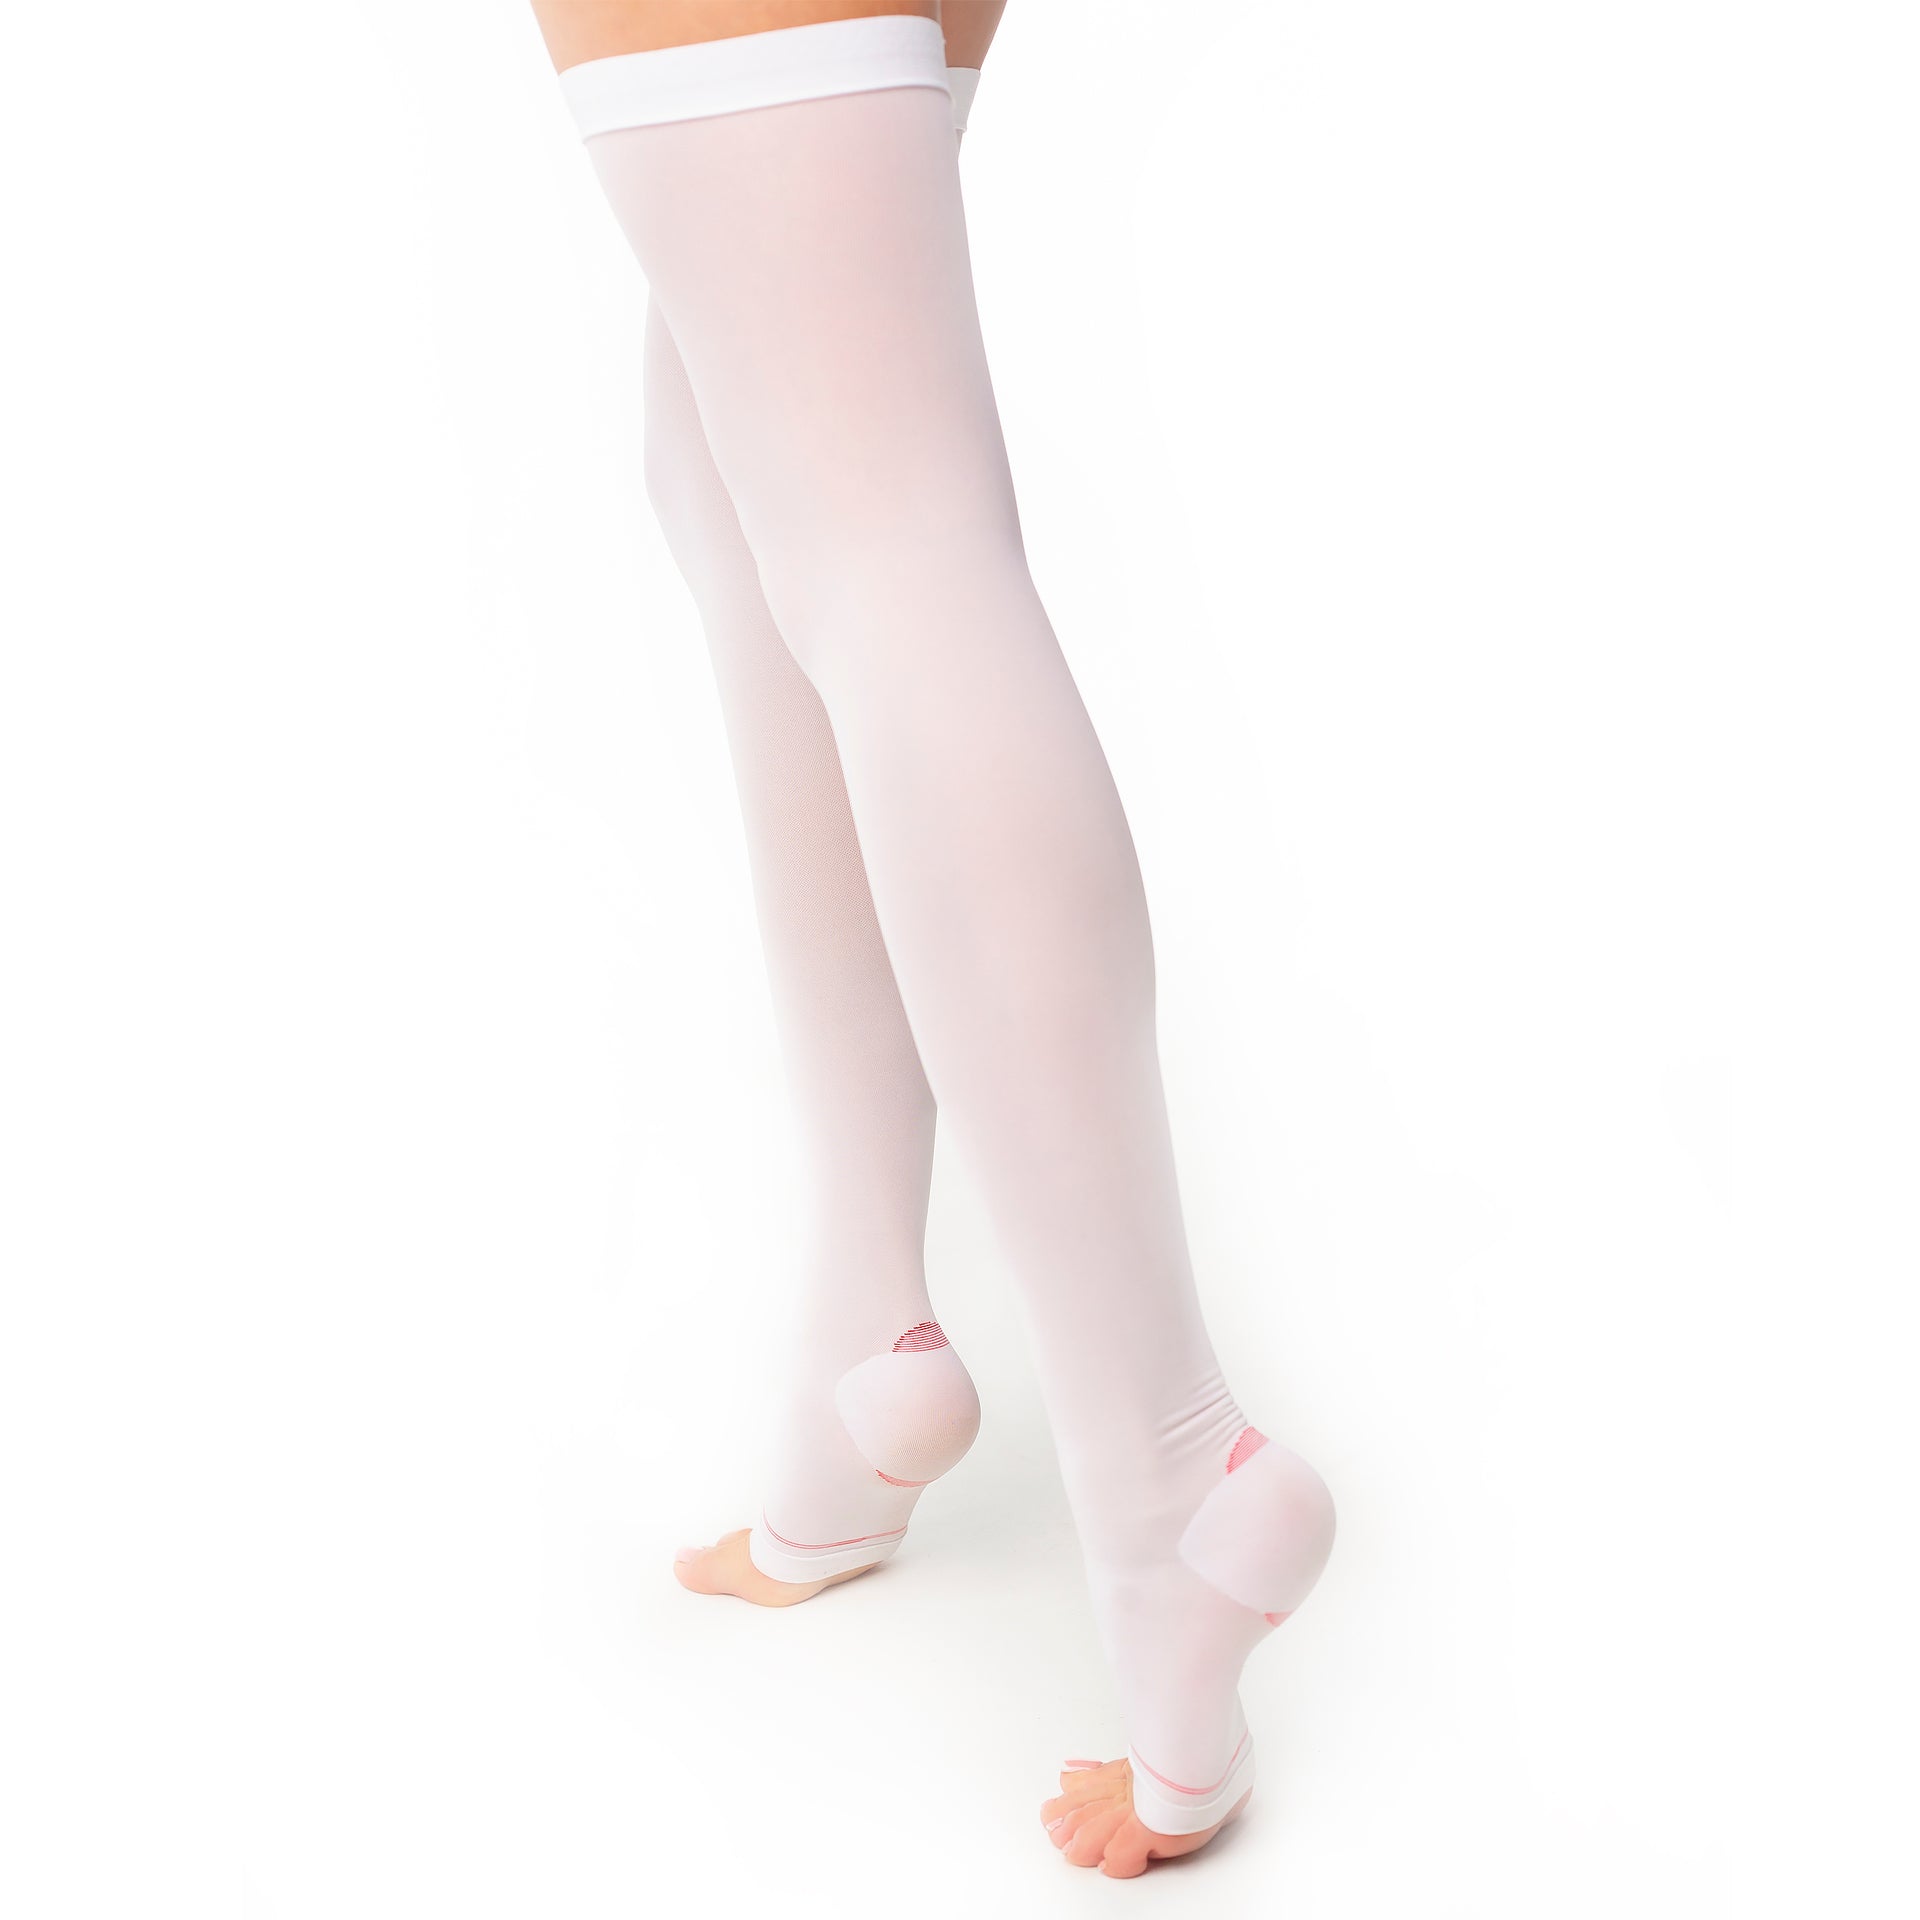 Anti-embolism thigh high stocking with waist attachment and inspection hole  - RIGHT LEG - 18-23 mmHg